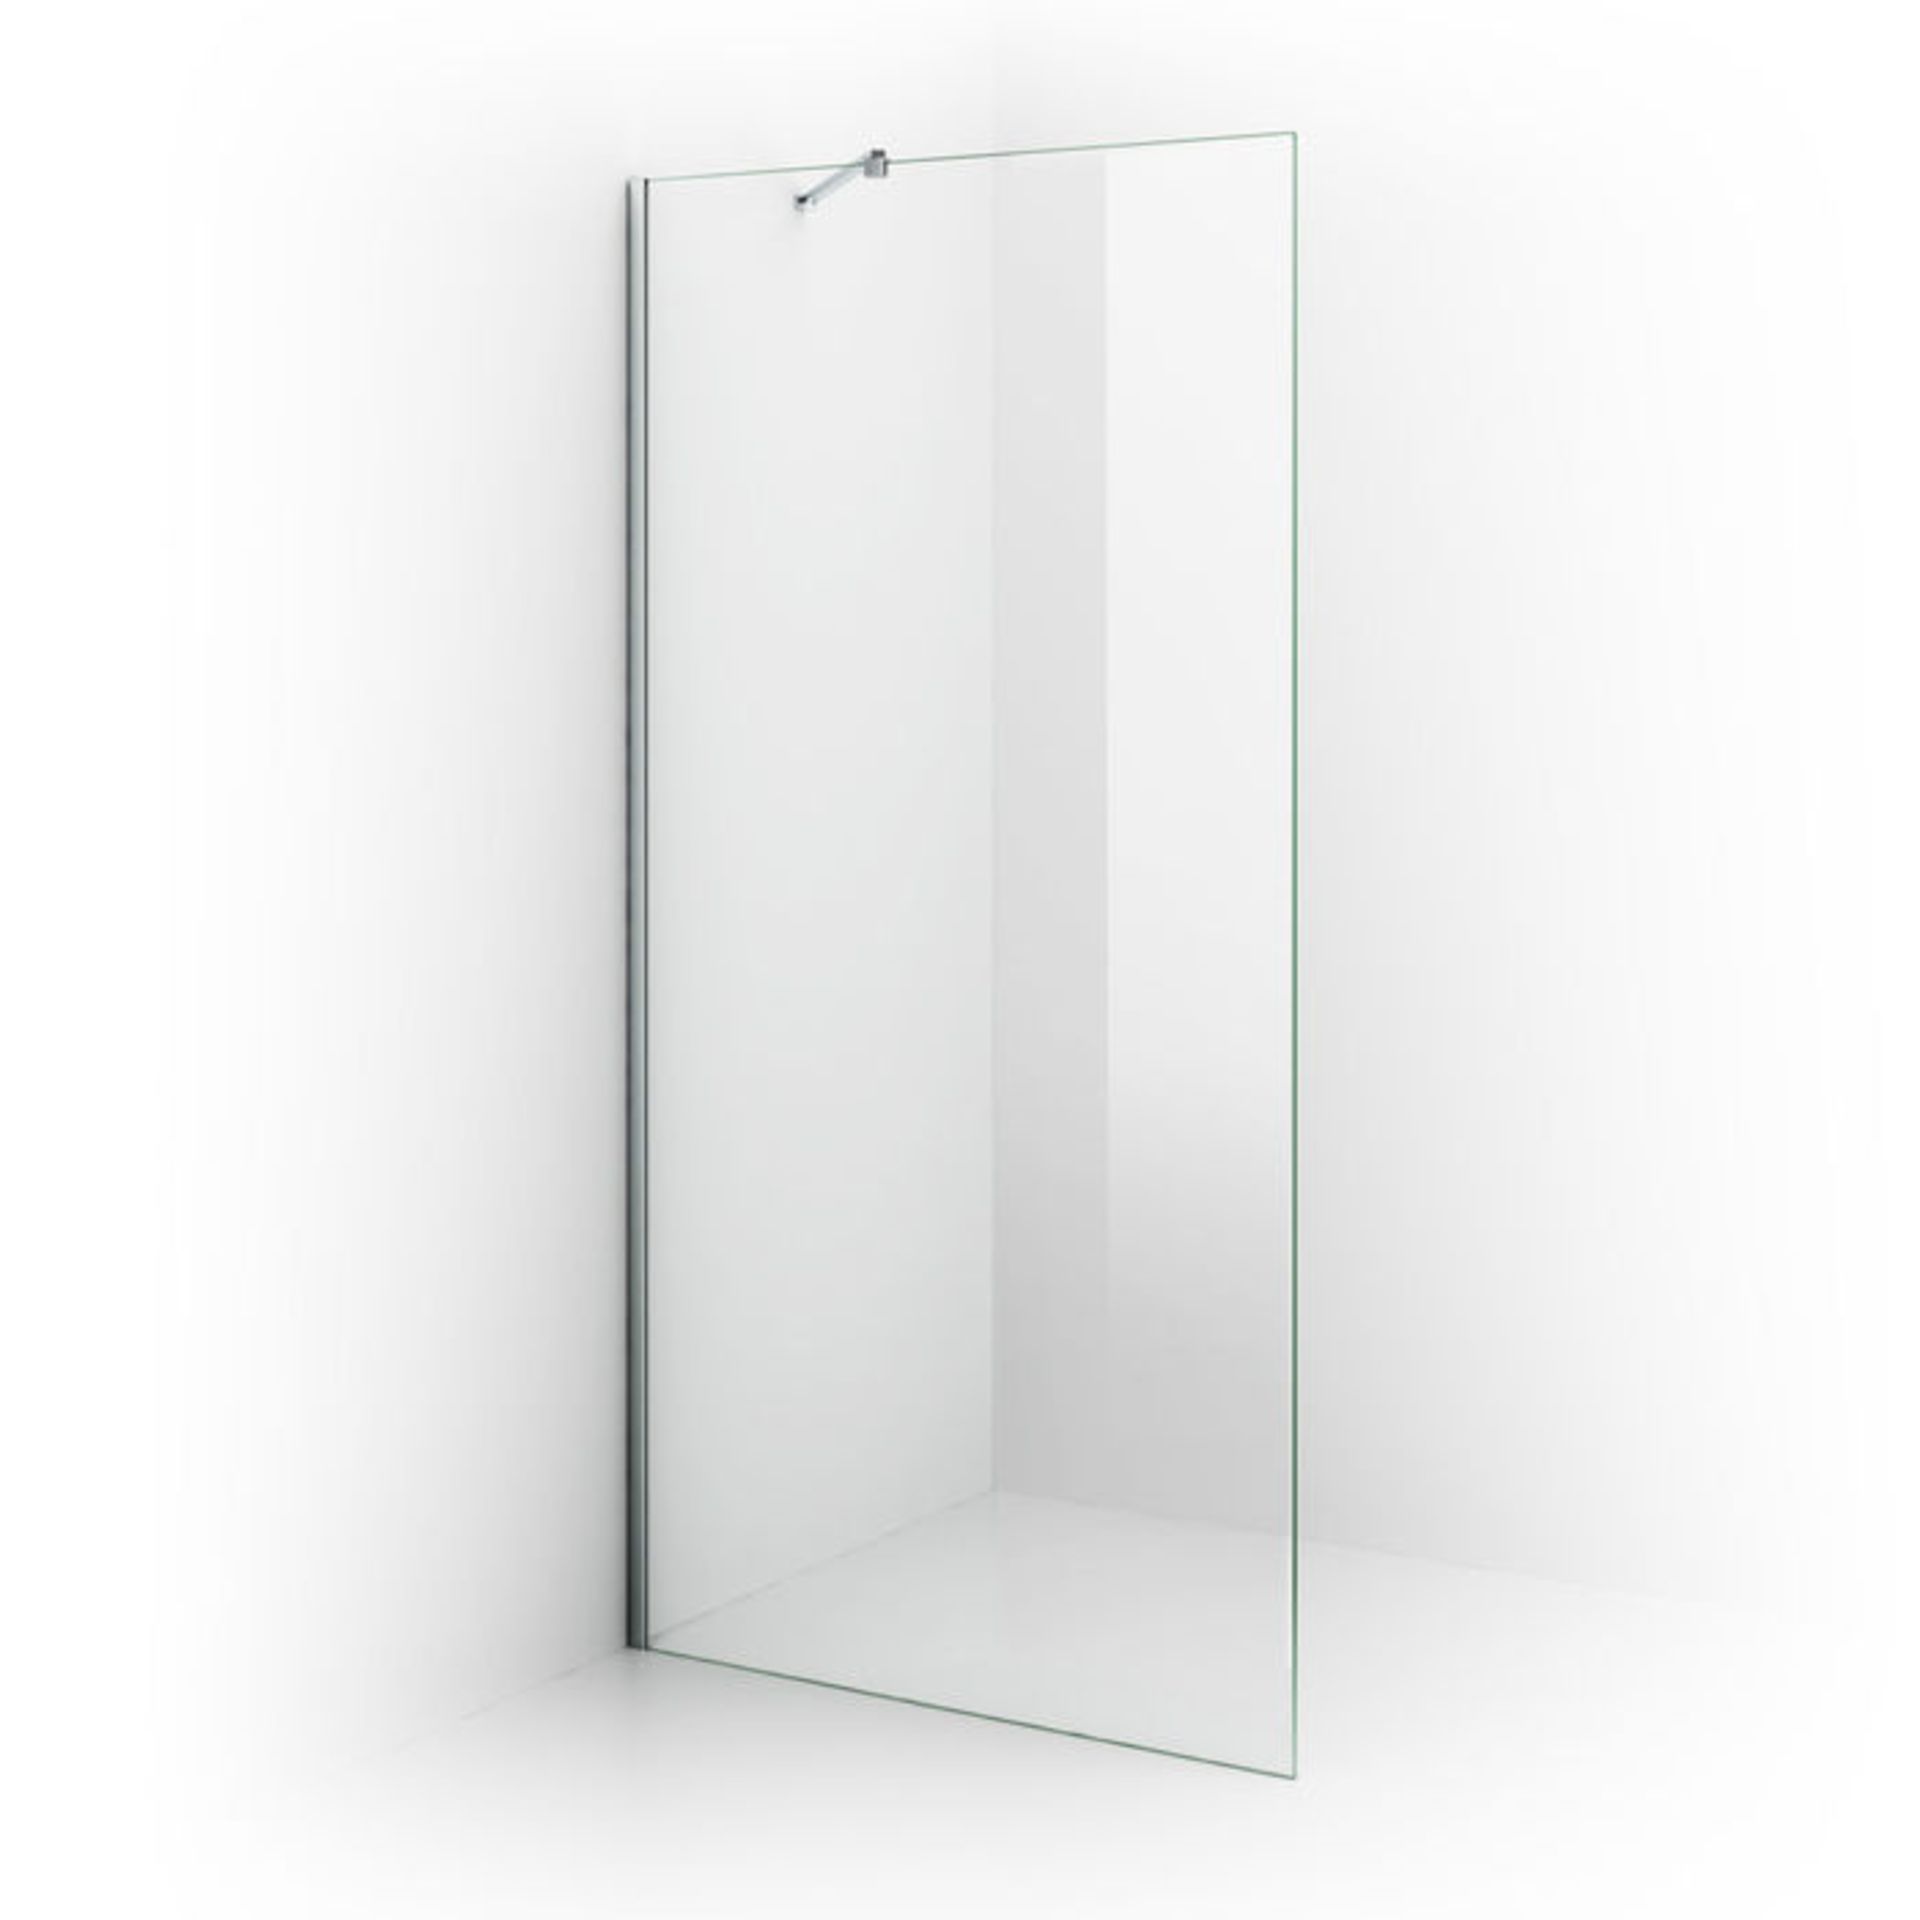 (MT185) 1000mm - 8mm - Premium EasyClean Wetroom Panel. RRP £399.99. 8mm EasyClean glass - Our glass - Image 3 of 4